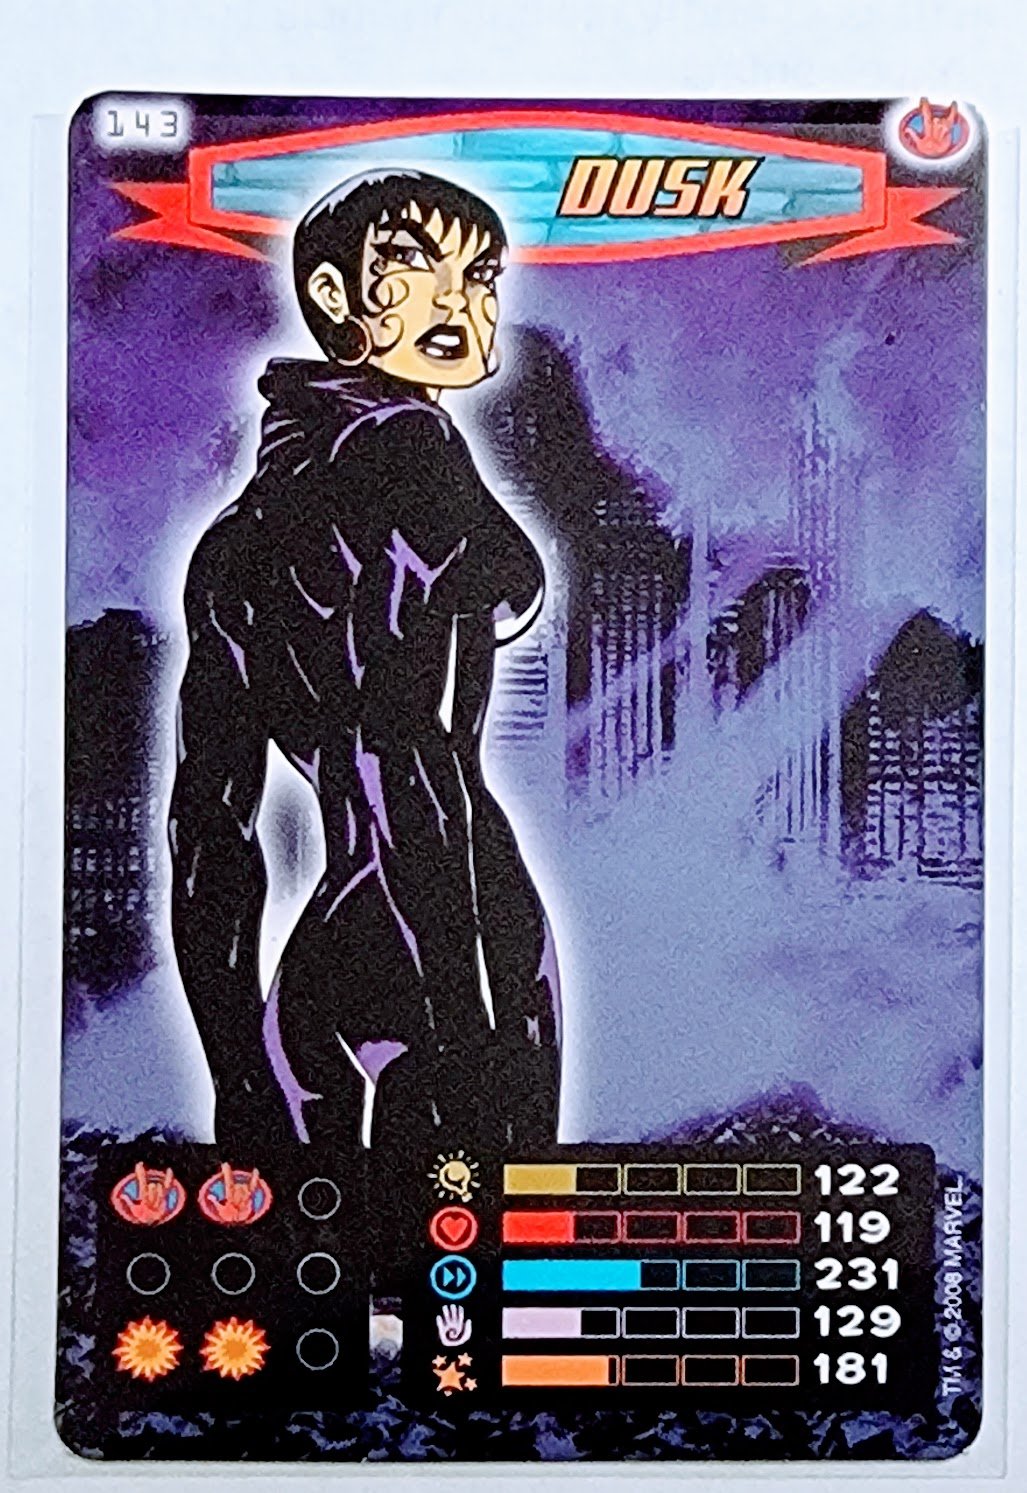 2008 Spiderman Heroes and Villains Dusk #143 Marvel Booster Trading Card UPTI simple Xclusive Collectibles   